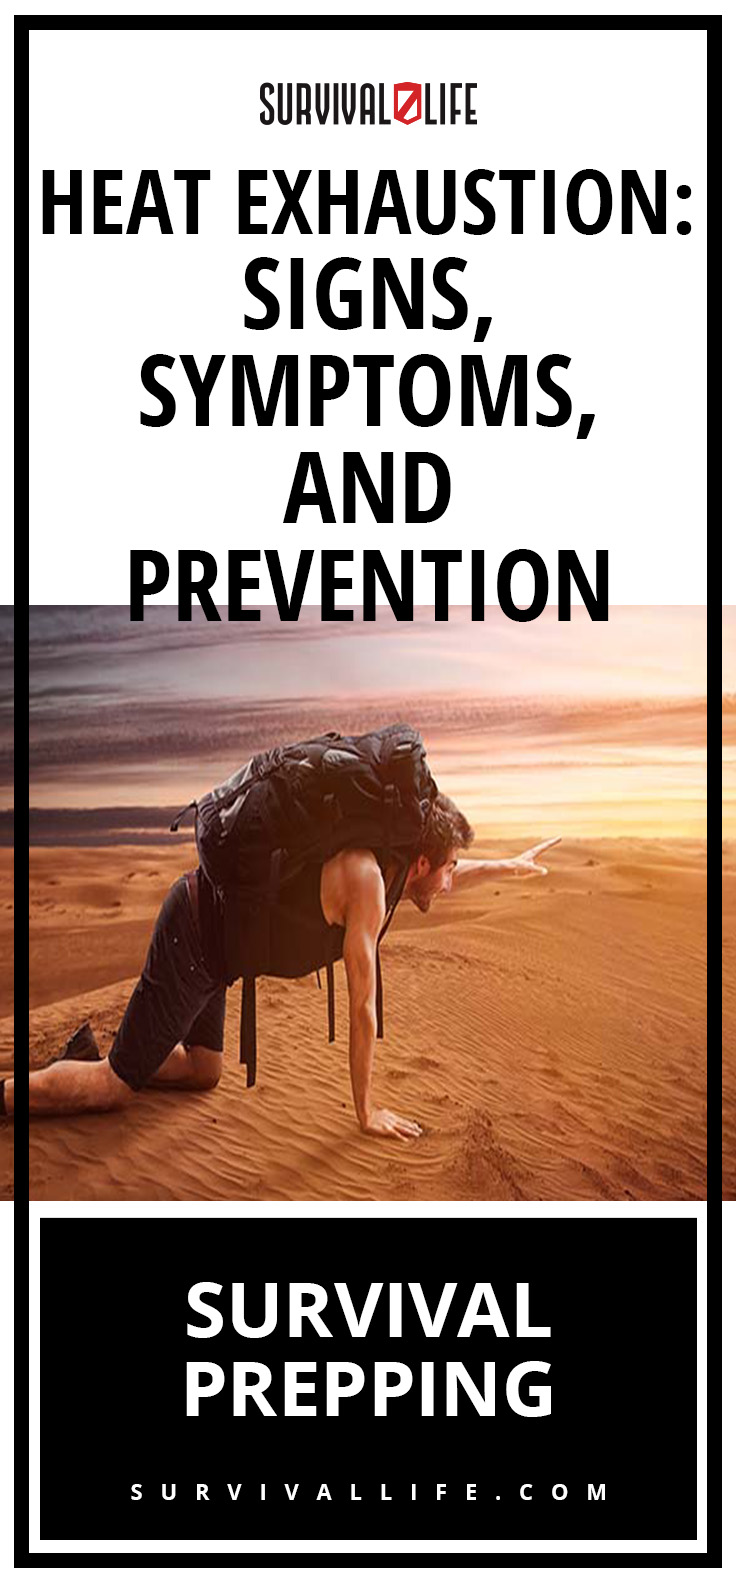 Check out Heat Exhaustion: Signs, Symptoms and Prevention at https://survivallife.com/heat-exhaustion/